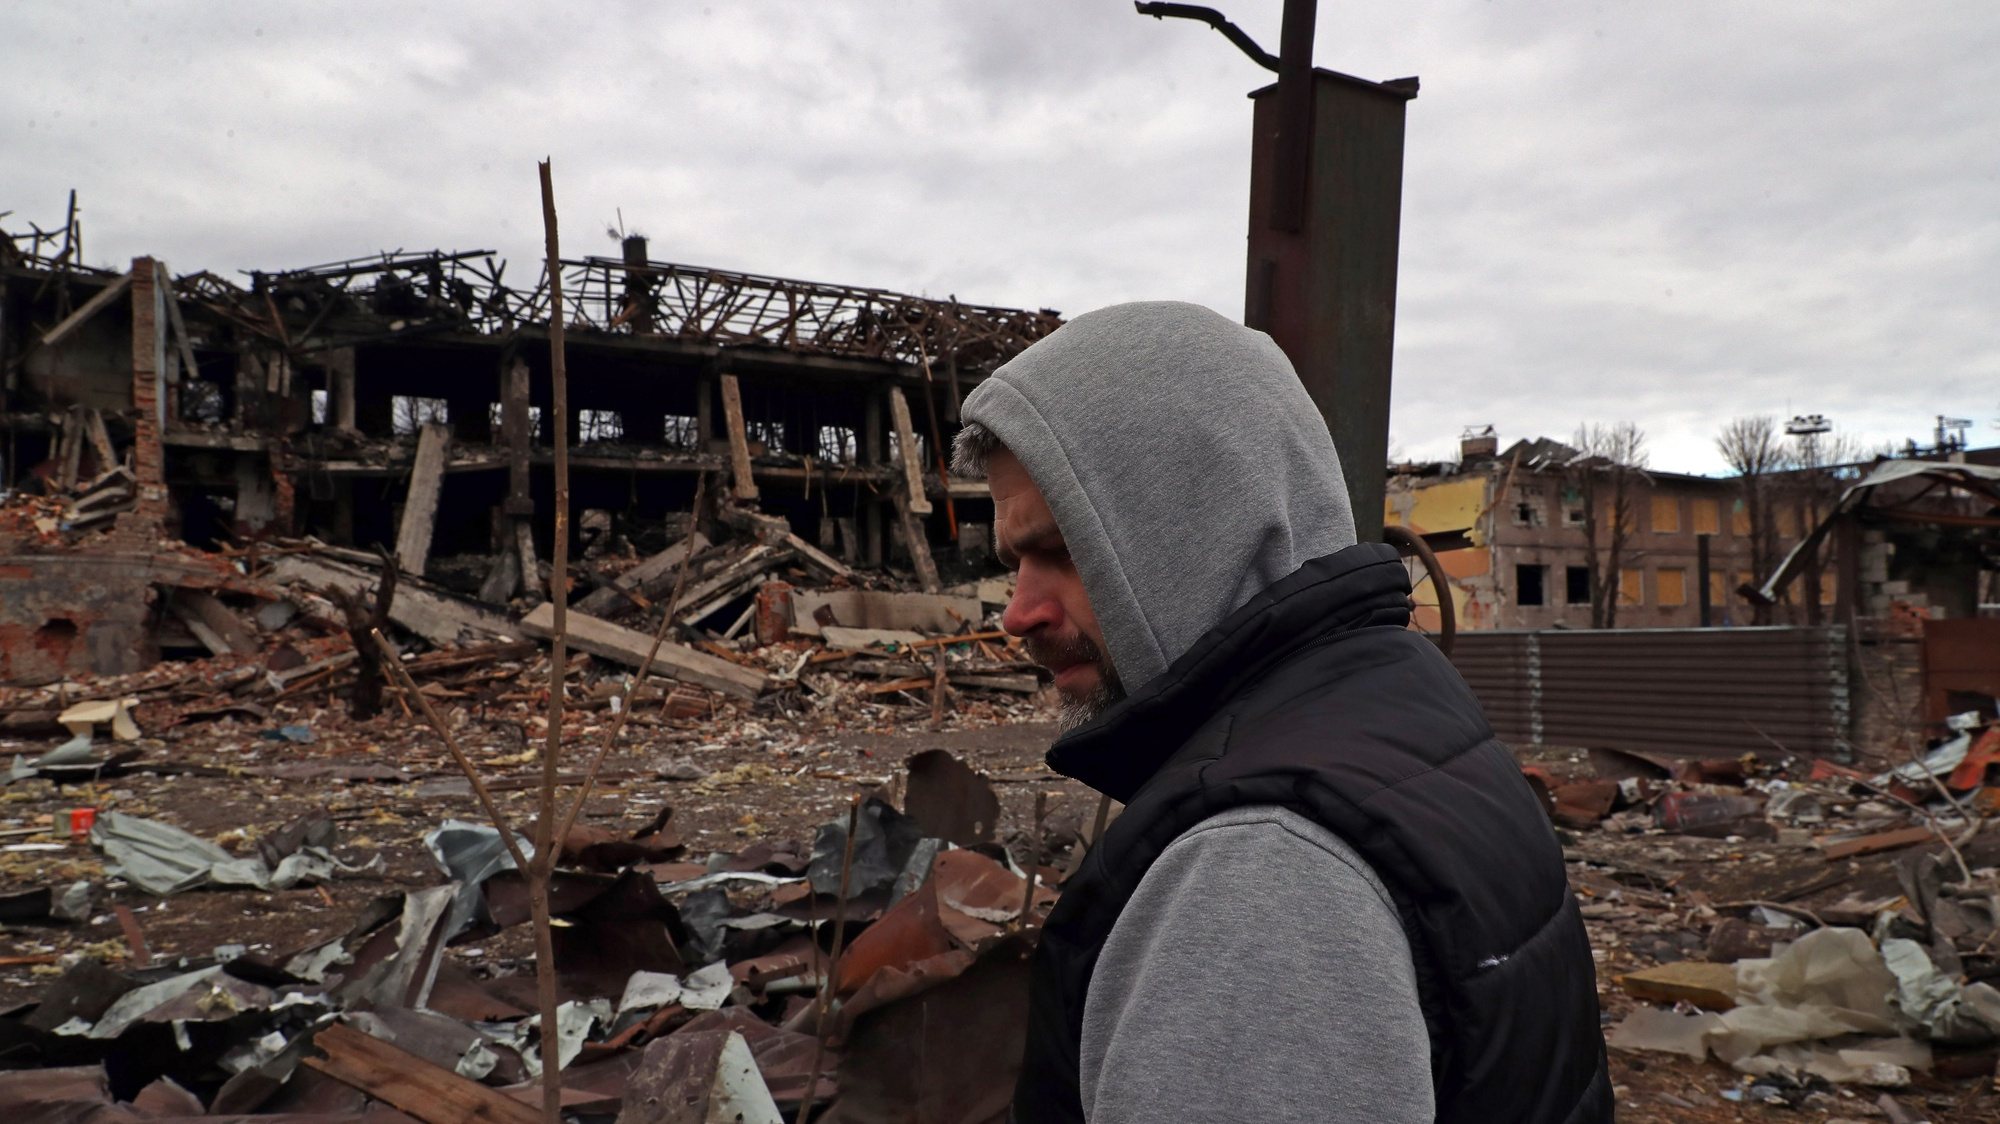 epa09852783 Ukranian Artem visits the damaged shoes factory shelled by a missile on 11 March causing the death of the facility security, in Dnipro, Ukraine, 27 March 2022. On 24 February Russian troops had entered Ukrainian territory in what the Russian president declared a &#039;special military operation&#039;, resulting in fighting and destruction in the country, a huge flow of refugees, and multiple sanctions against Russia.  EPA/NUNO VEIGA